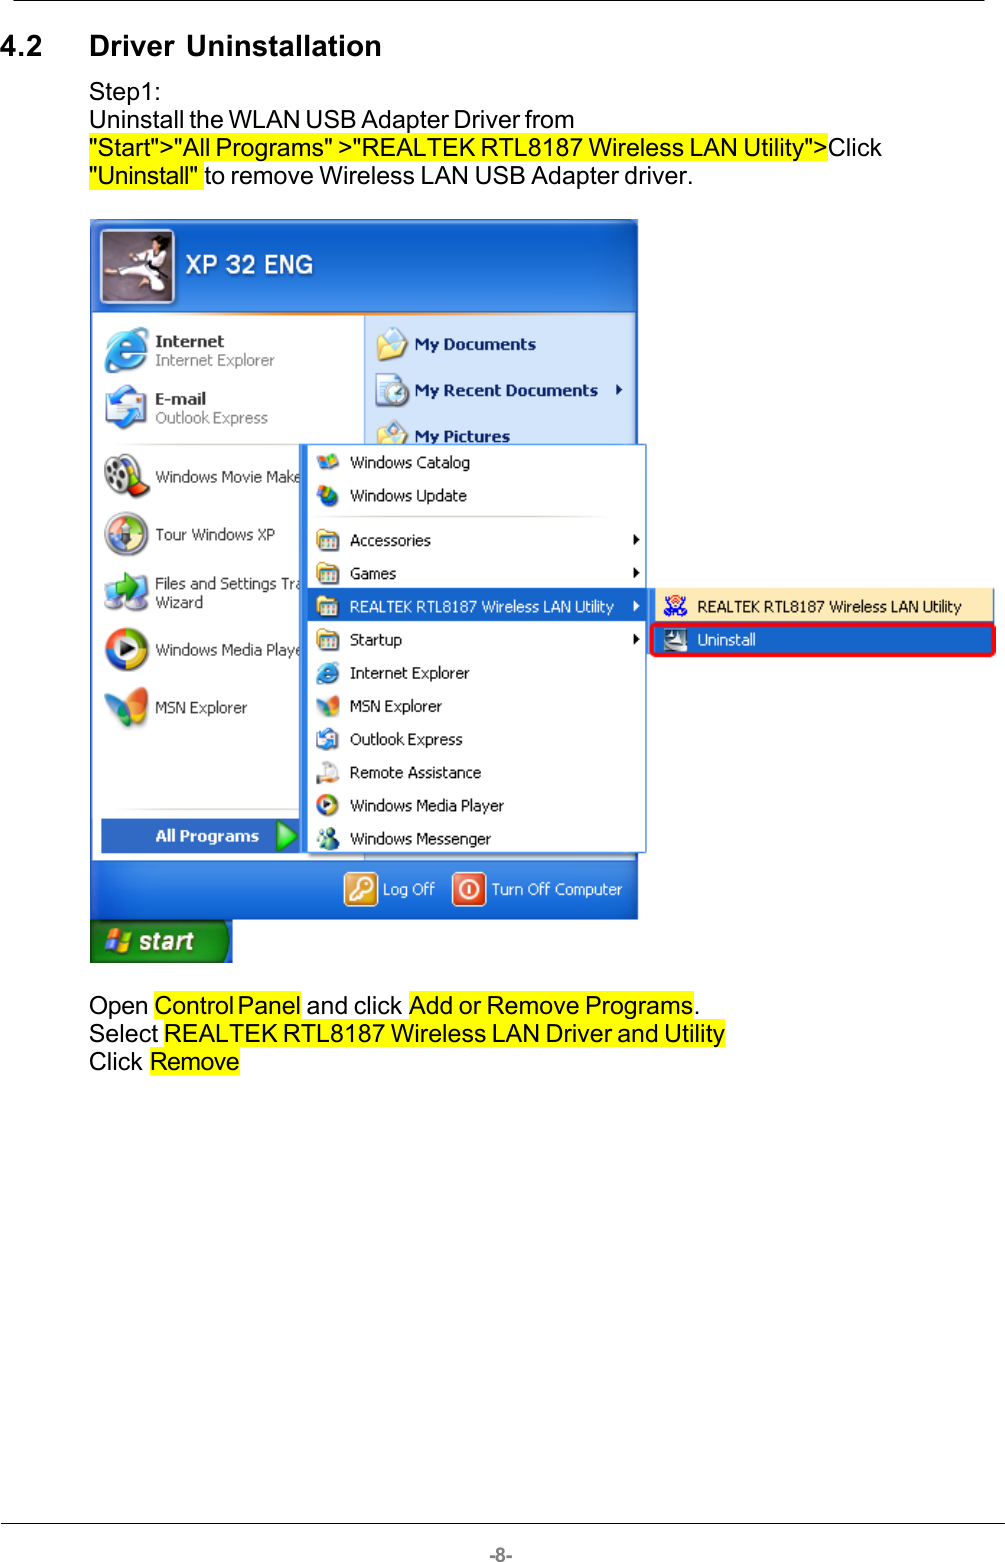 -8-4.2 Driver UninstallationStep1:Uninstall the WLAN USB Adapter Driver from&quot;Start&quot;&gt;&quot;All Programs&quot; &gt;&quot;REALTEK RTL8187 Wireless LAN Utility&quot;&gt;Click&quot;Uninstall&quot; to remove Wireless LAN USB Adapter driver.Open Control Panel and click Add or Remove Programs.Select REALTEK RTL8187 Wireless LAN Driver and UtilityClick Remove